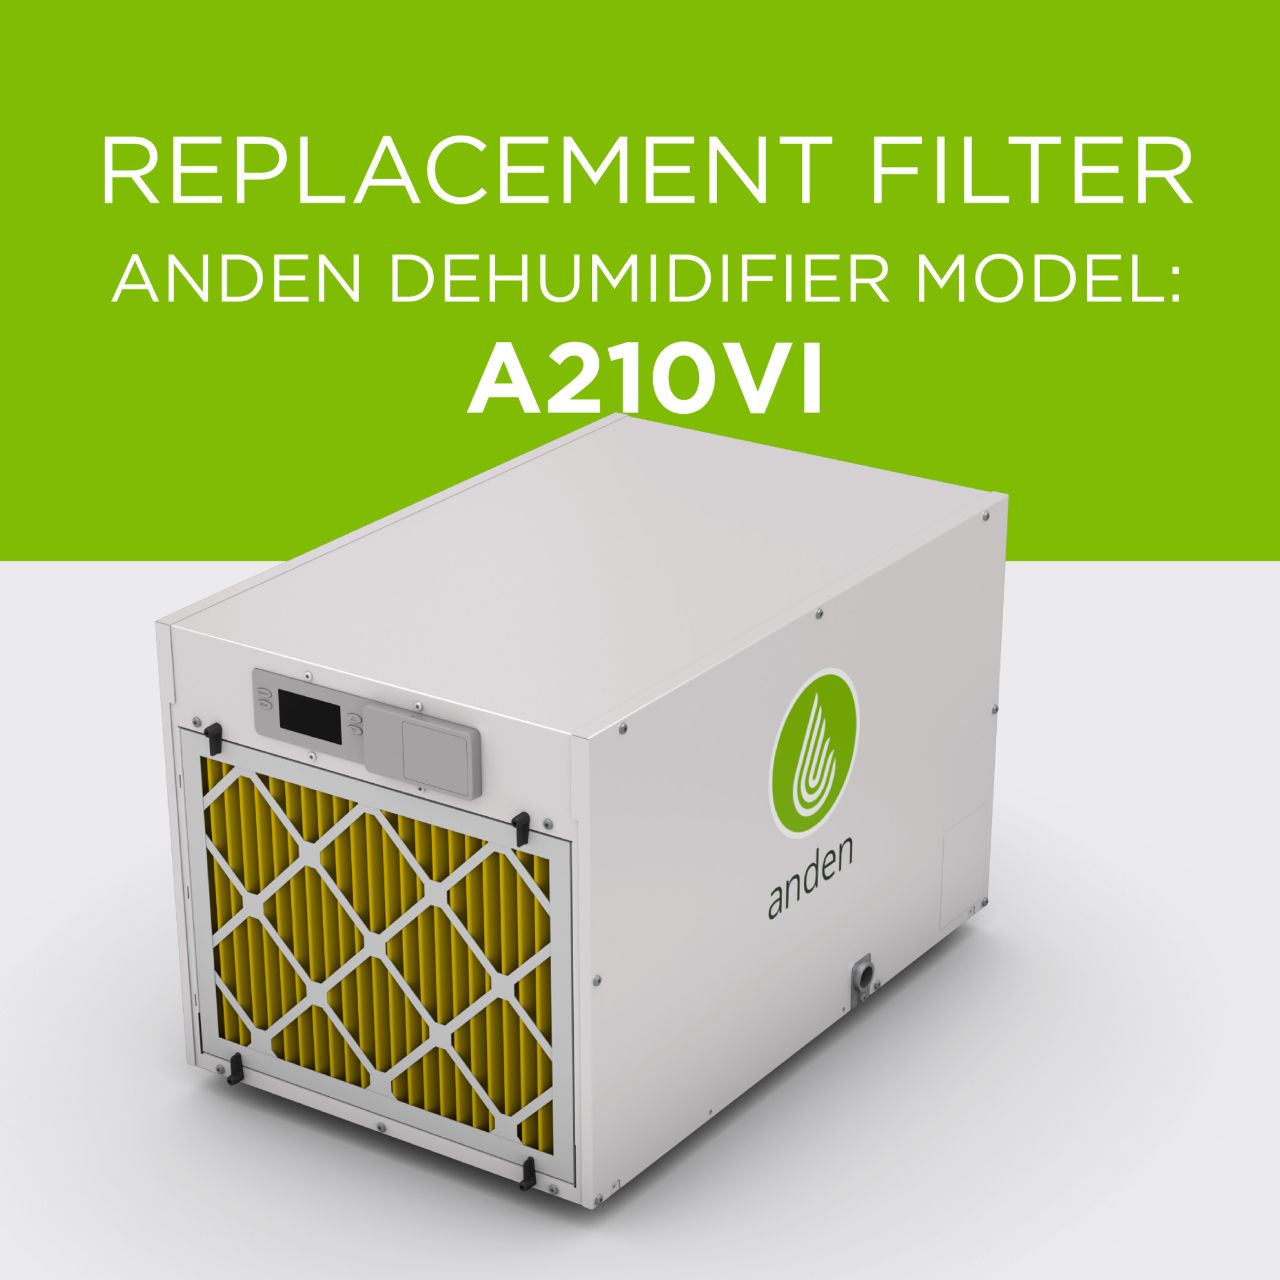 Anden-Model-A210V1-Replacement-Air Filter-Dehumidifier